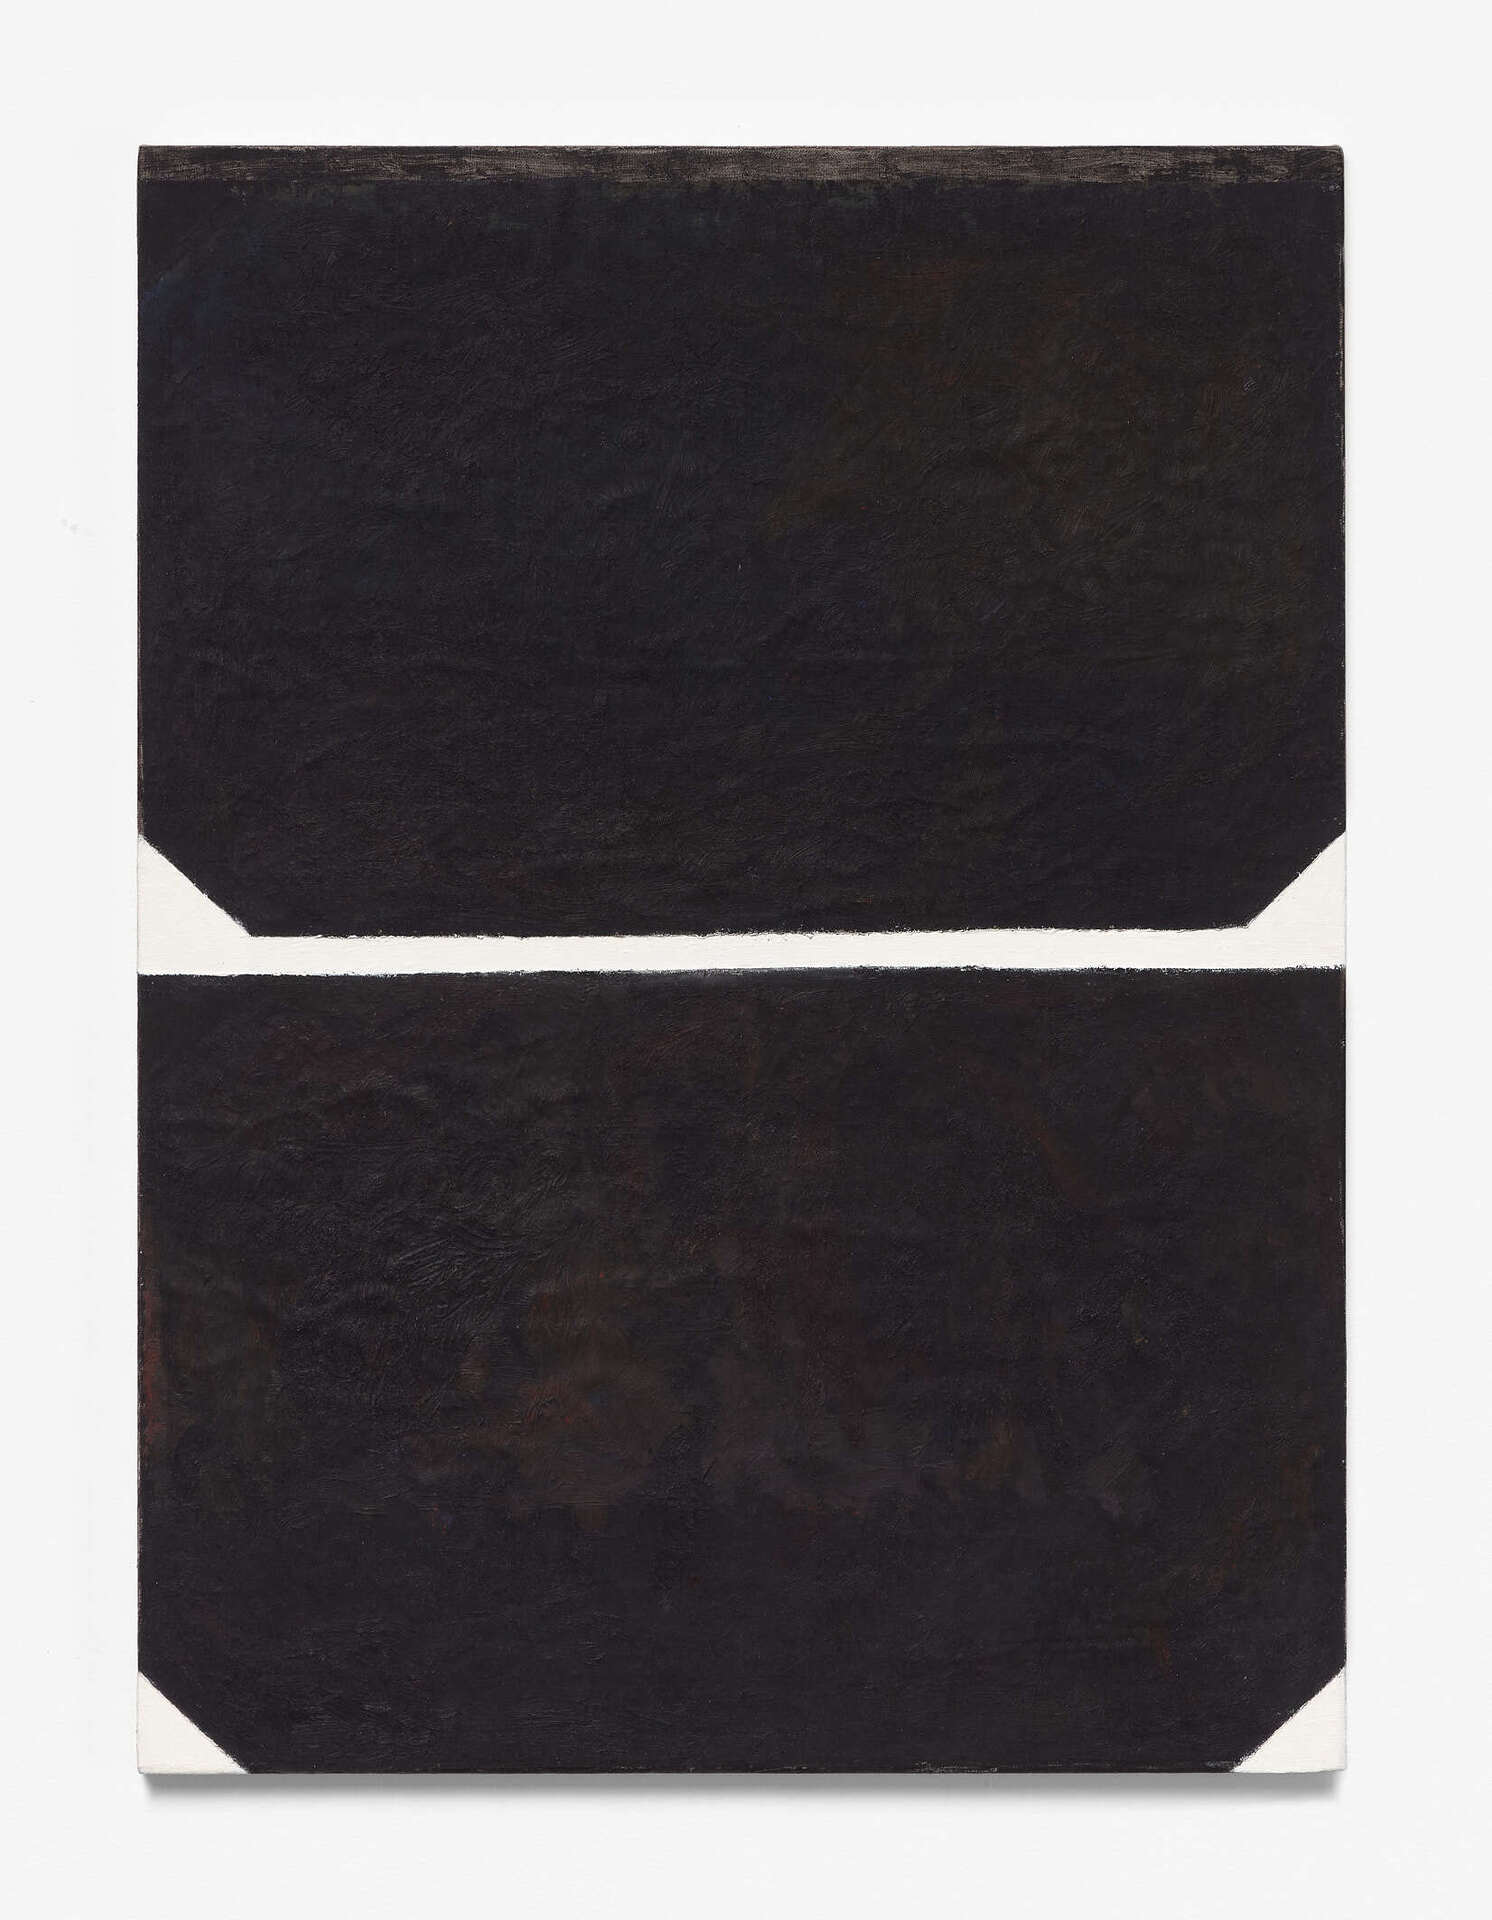 Allan Rand, Chthonic, 2020, Gesso, oil on linen, 48.5 x 65.5 x 1.2 cm.